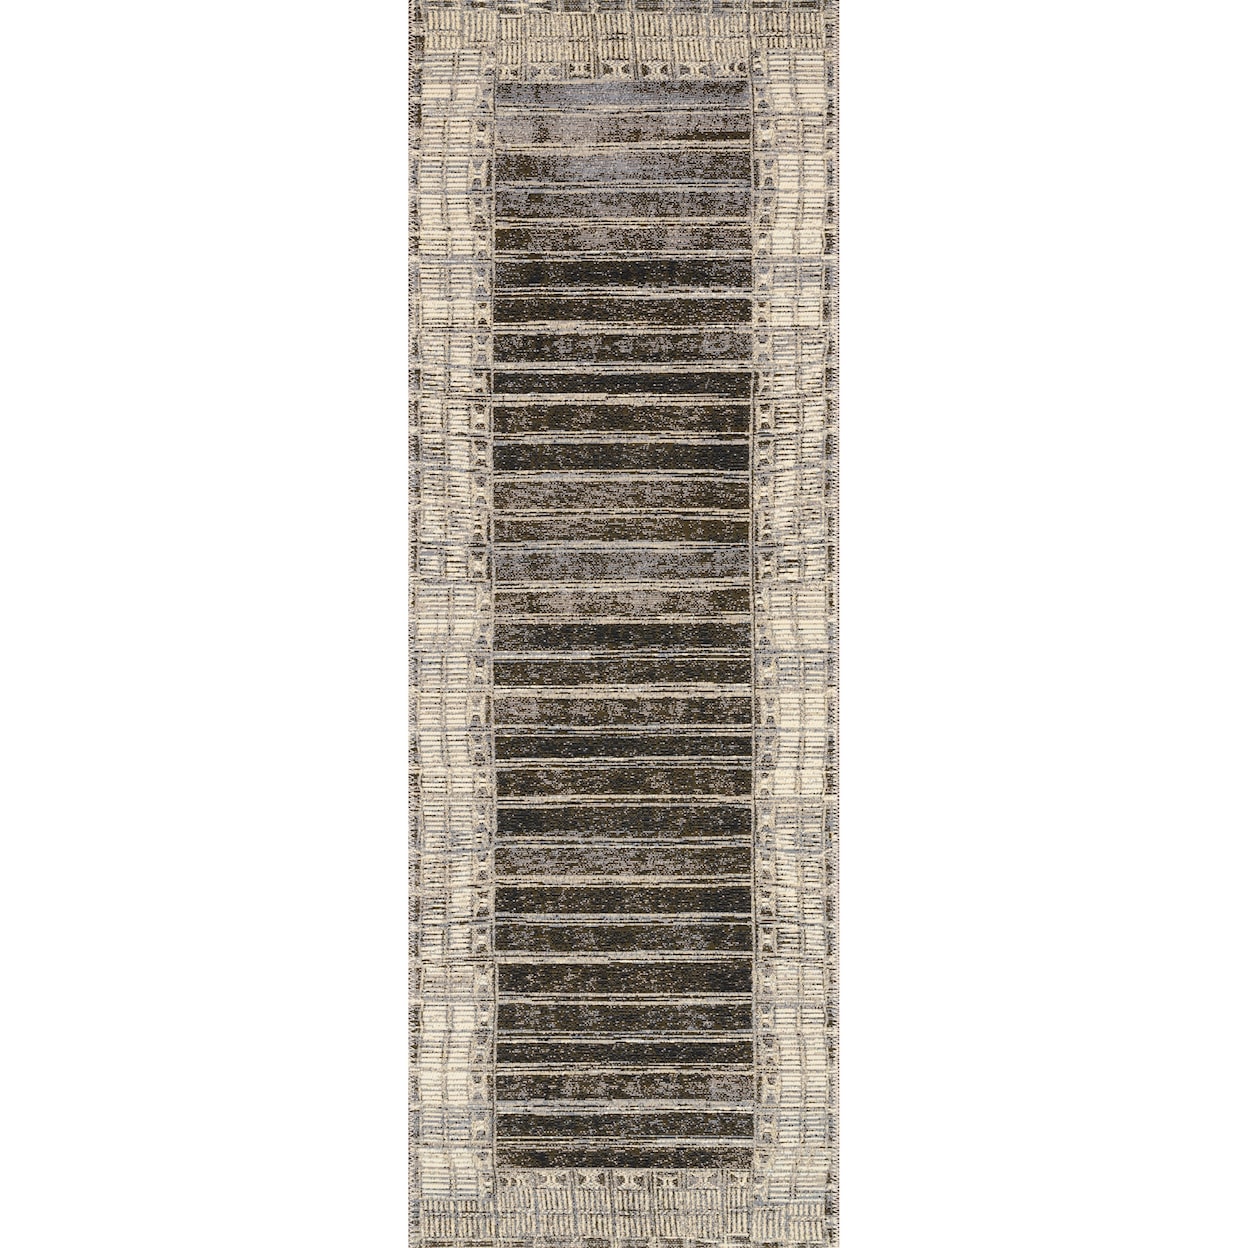 Reeds Rugs Mika 10'6" x 13'9" Charcoal / Ivory Rug